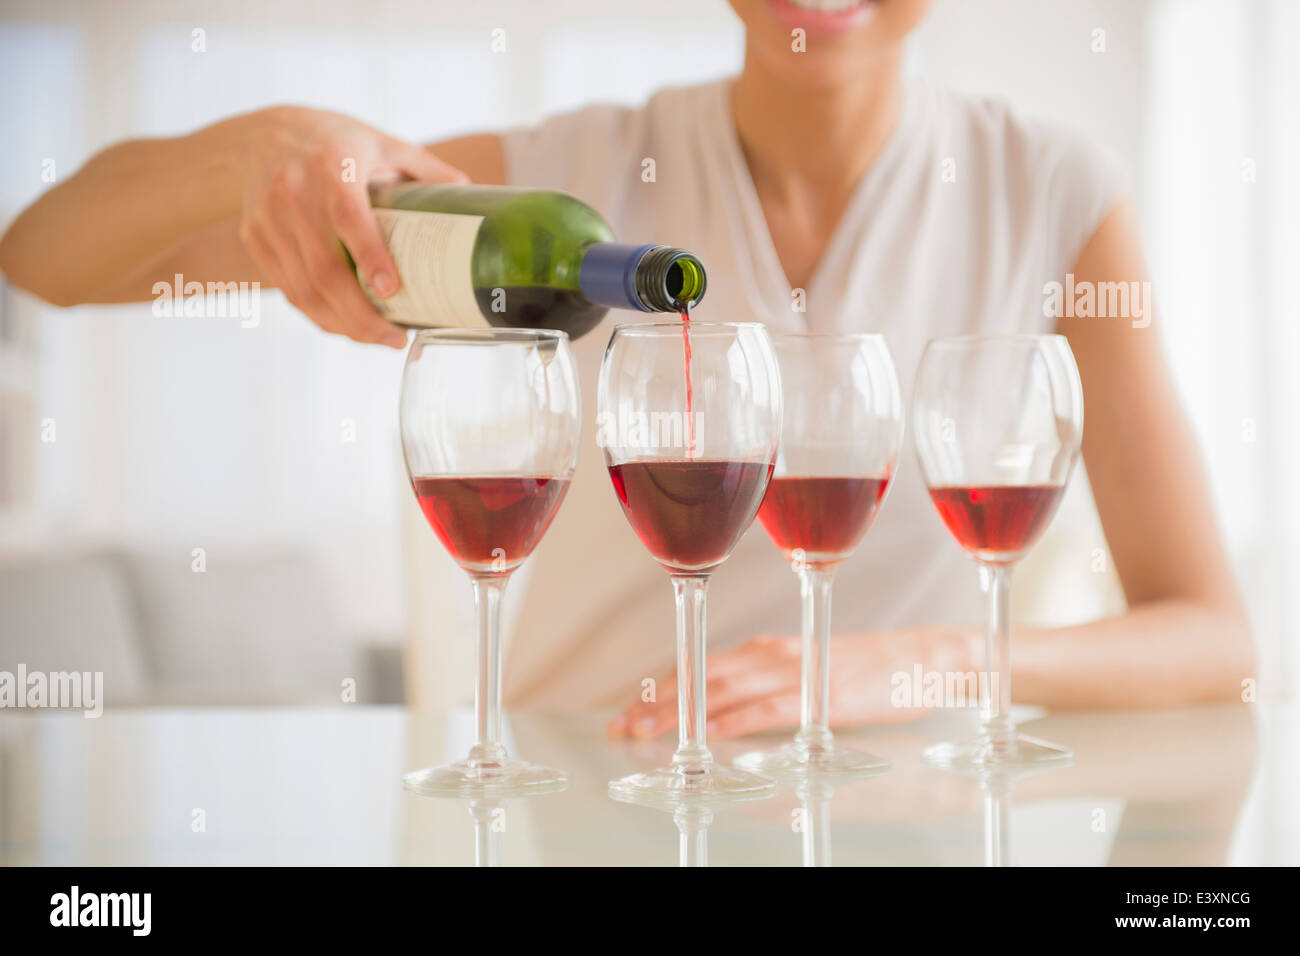 Black woman pouring glasses of wine Stock Photo